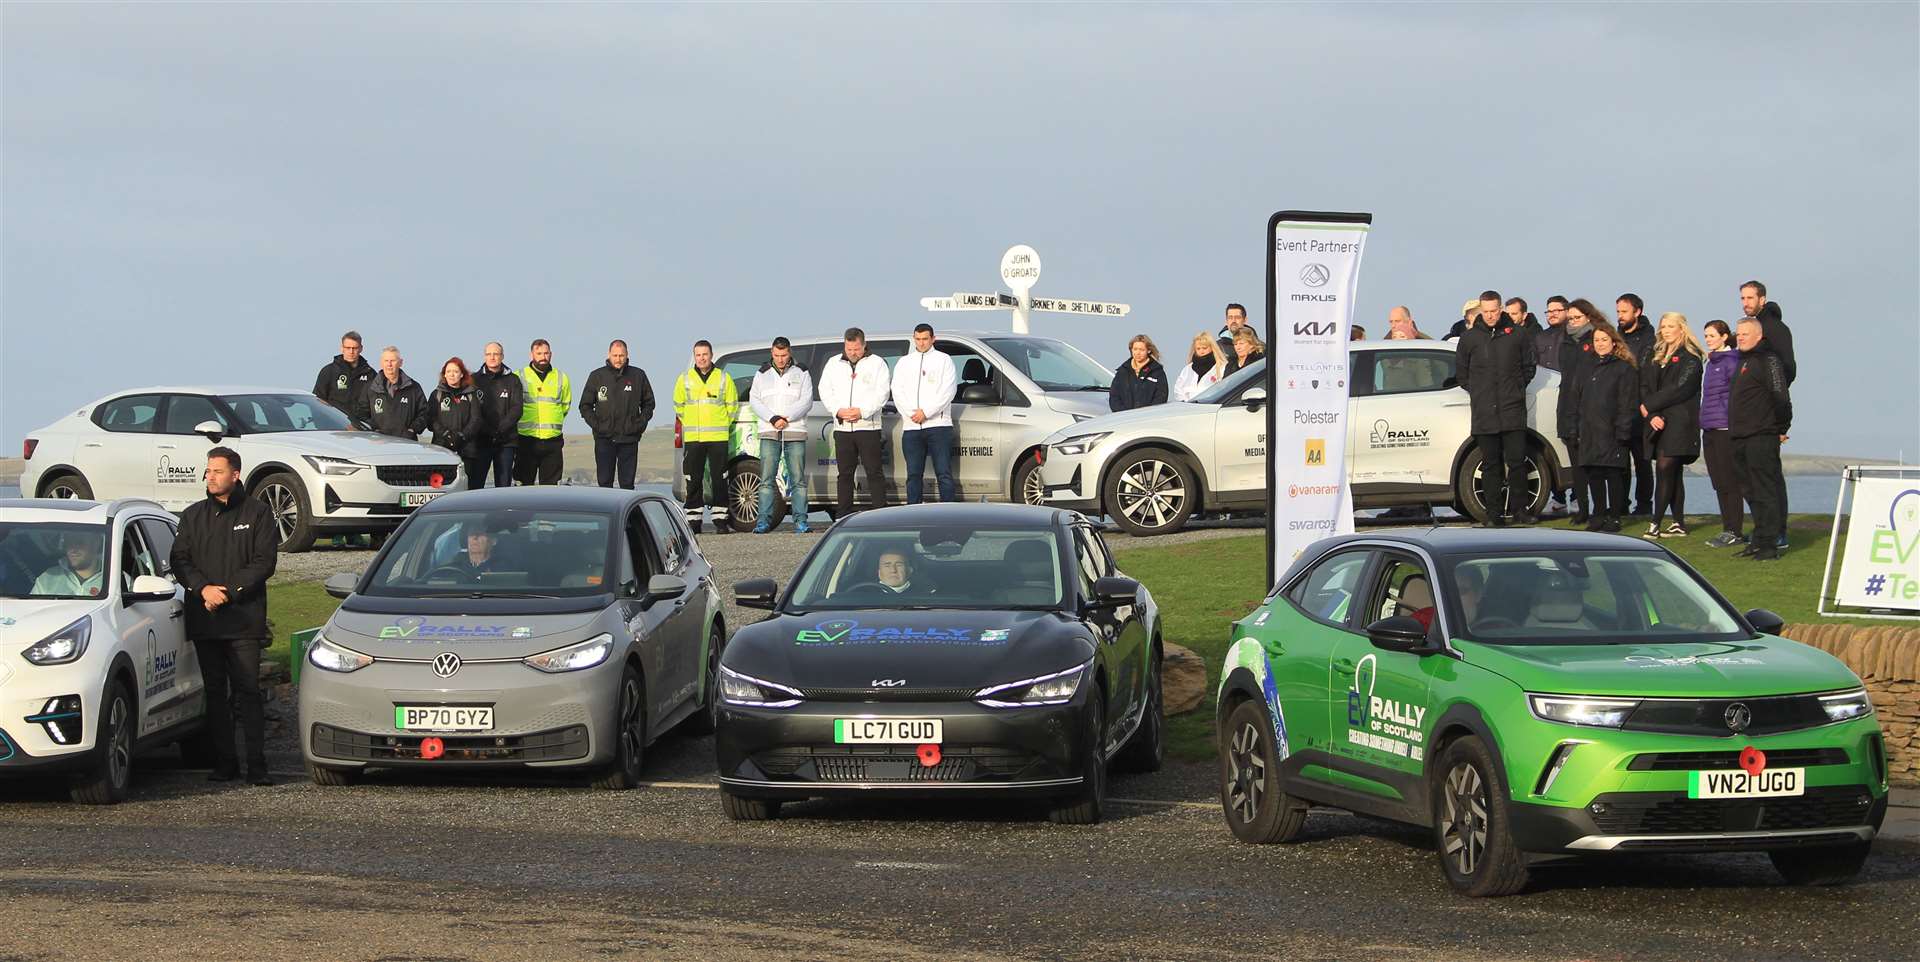 Crews taking part in the EV Rally of Scotland gather at the John O'Groats signpost to show their respects at 11am on Armistice Day.